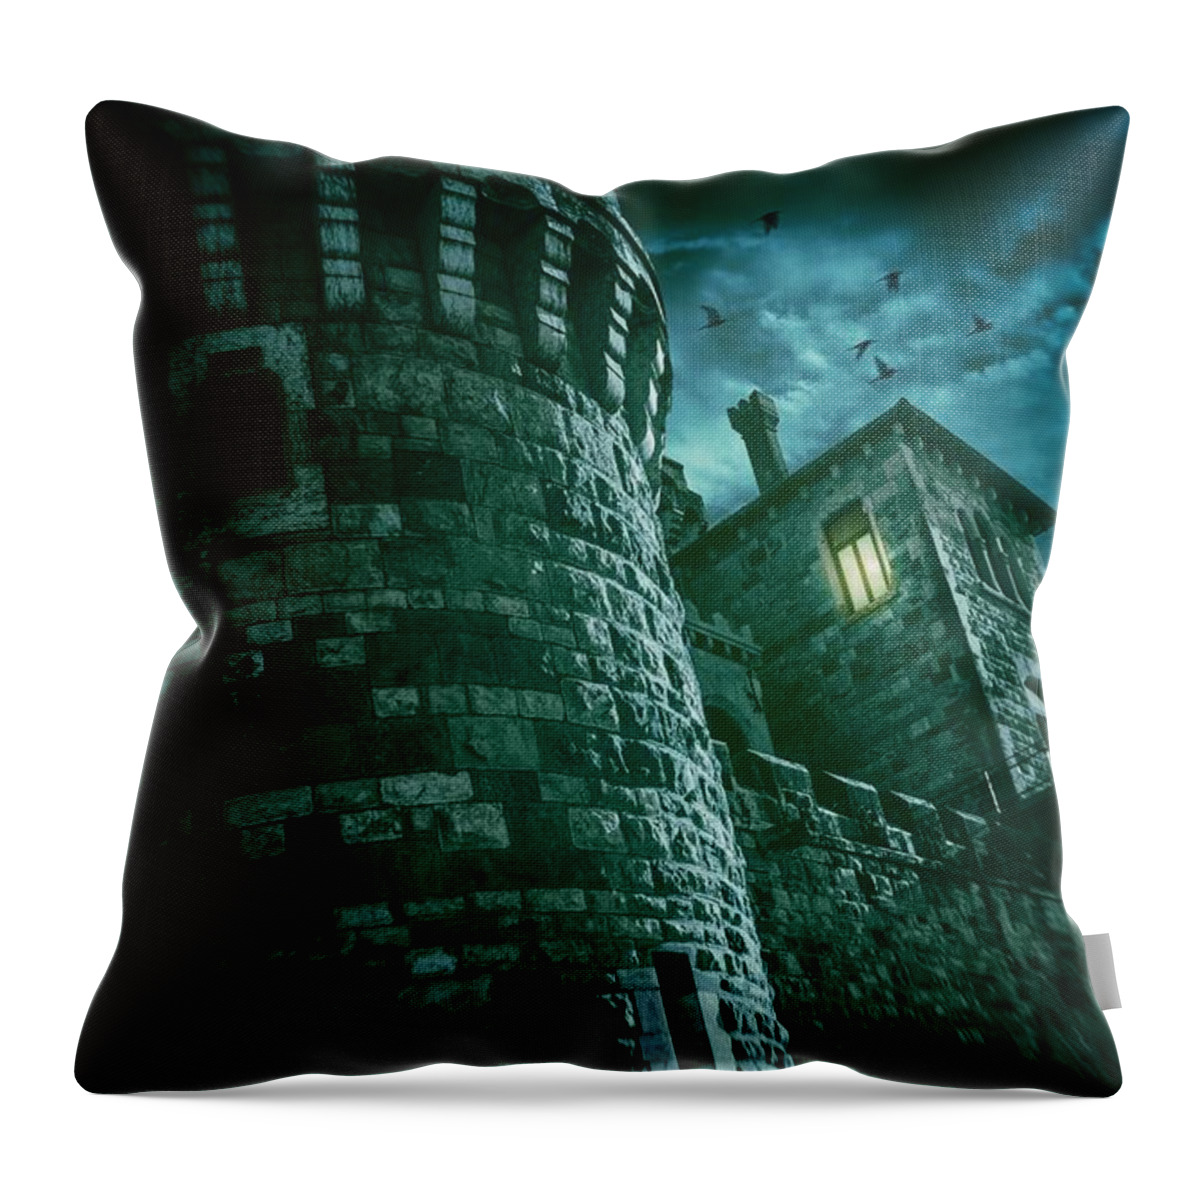 Castle Throw Pillow featuring the photograph Dark Tower by Carlos Caetano